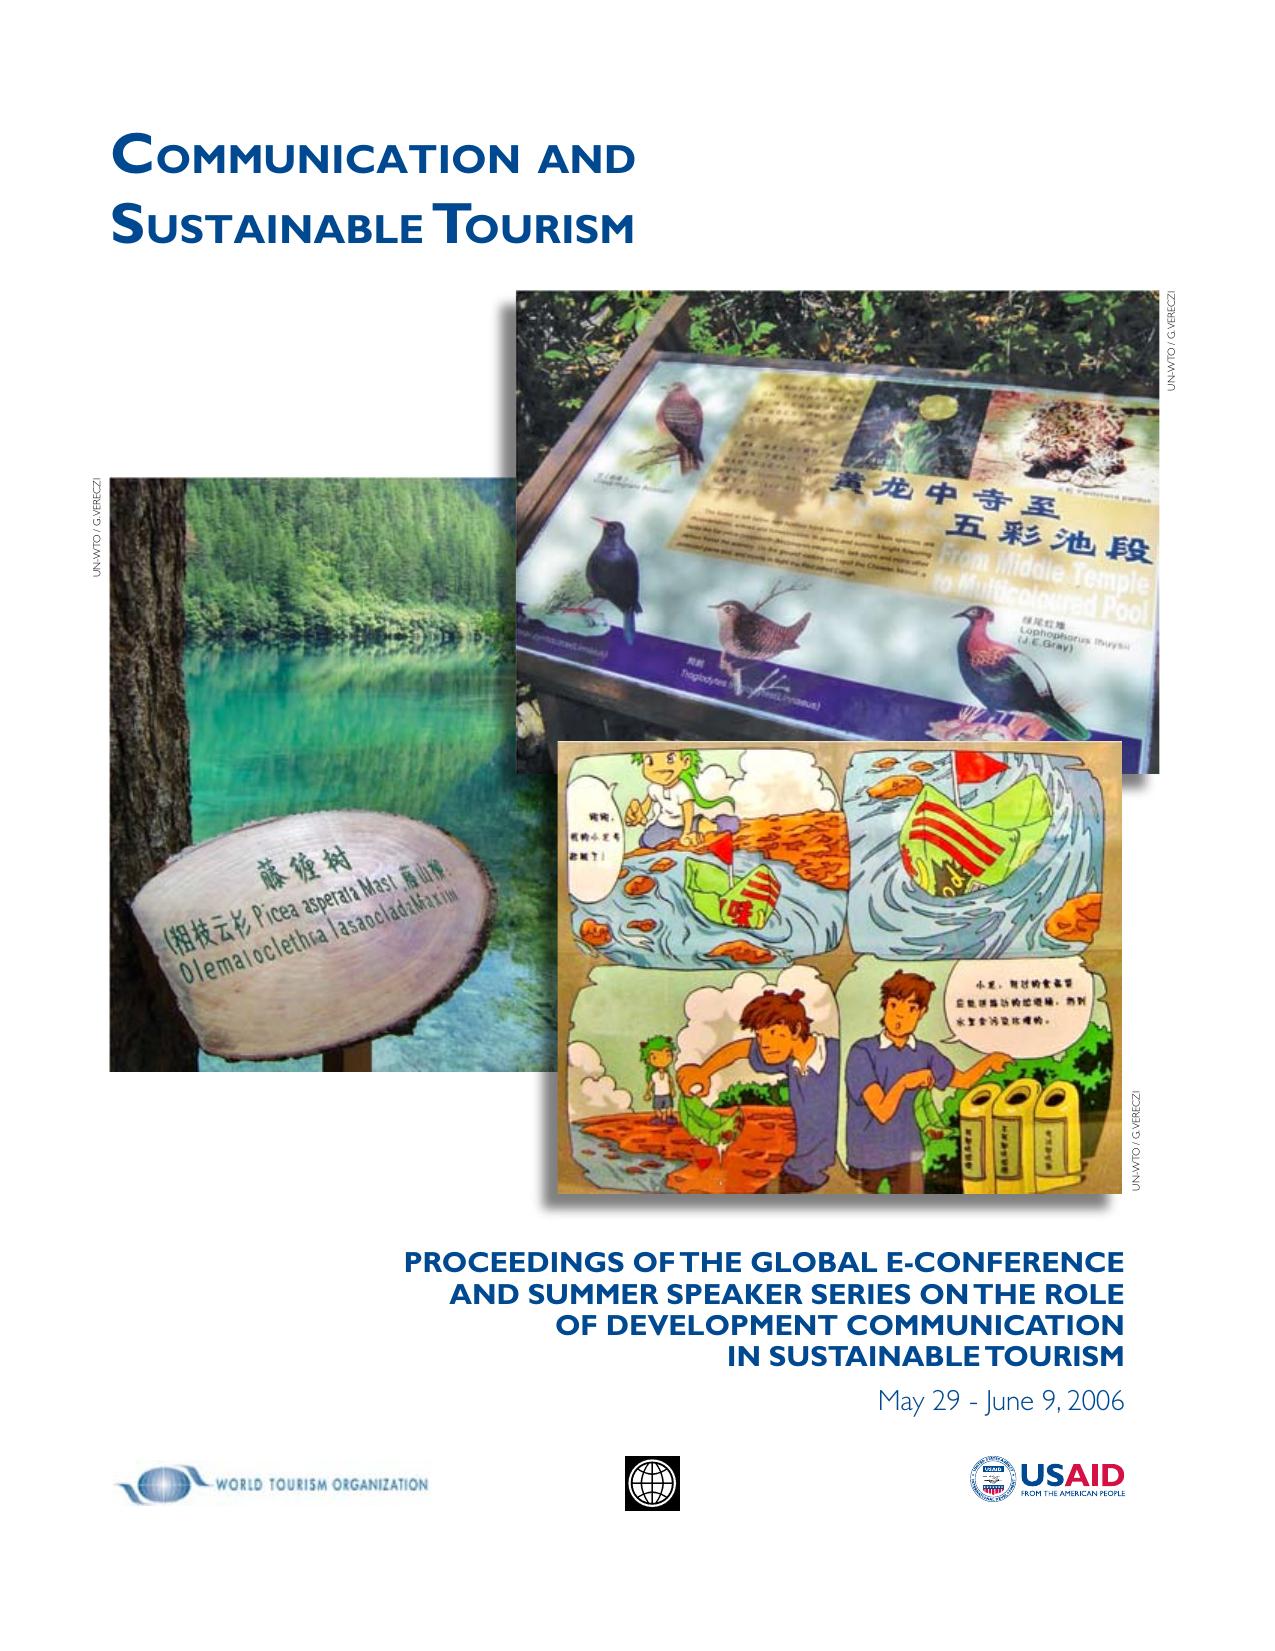 Communication and Sustainable Tourism 2006